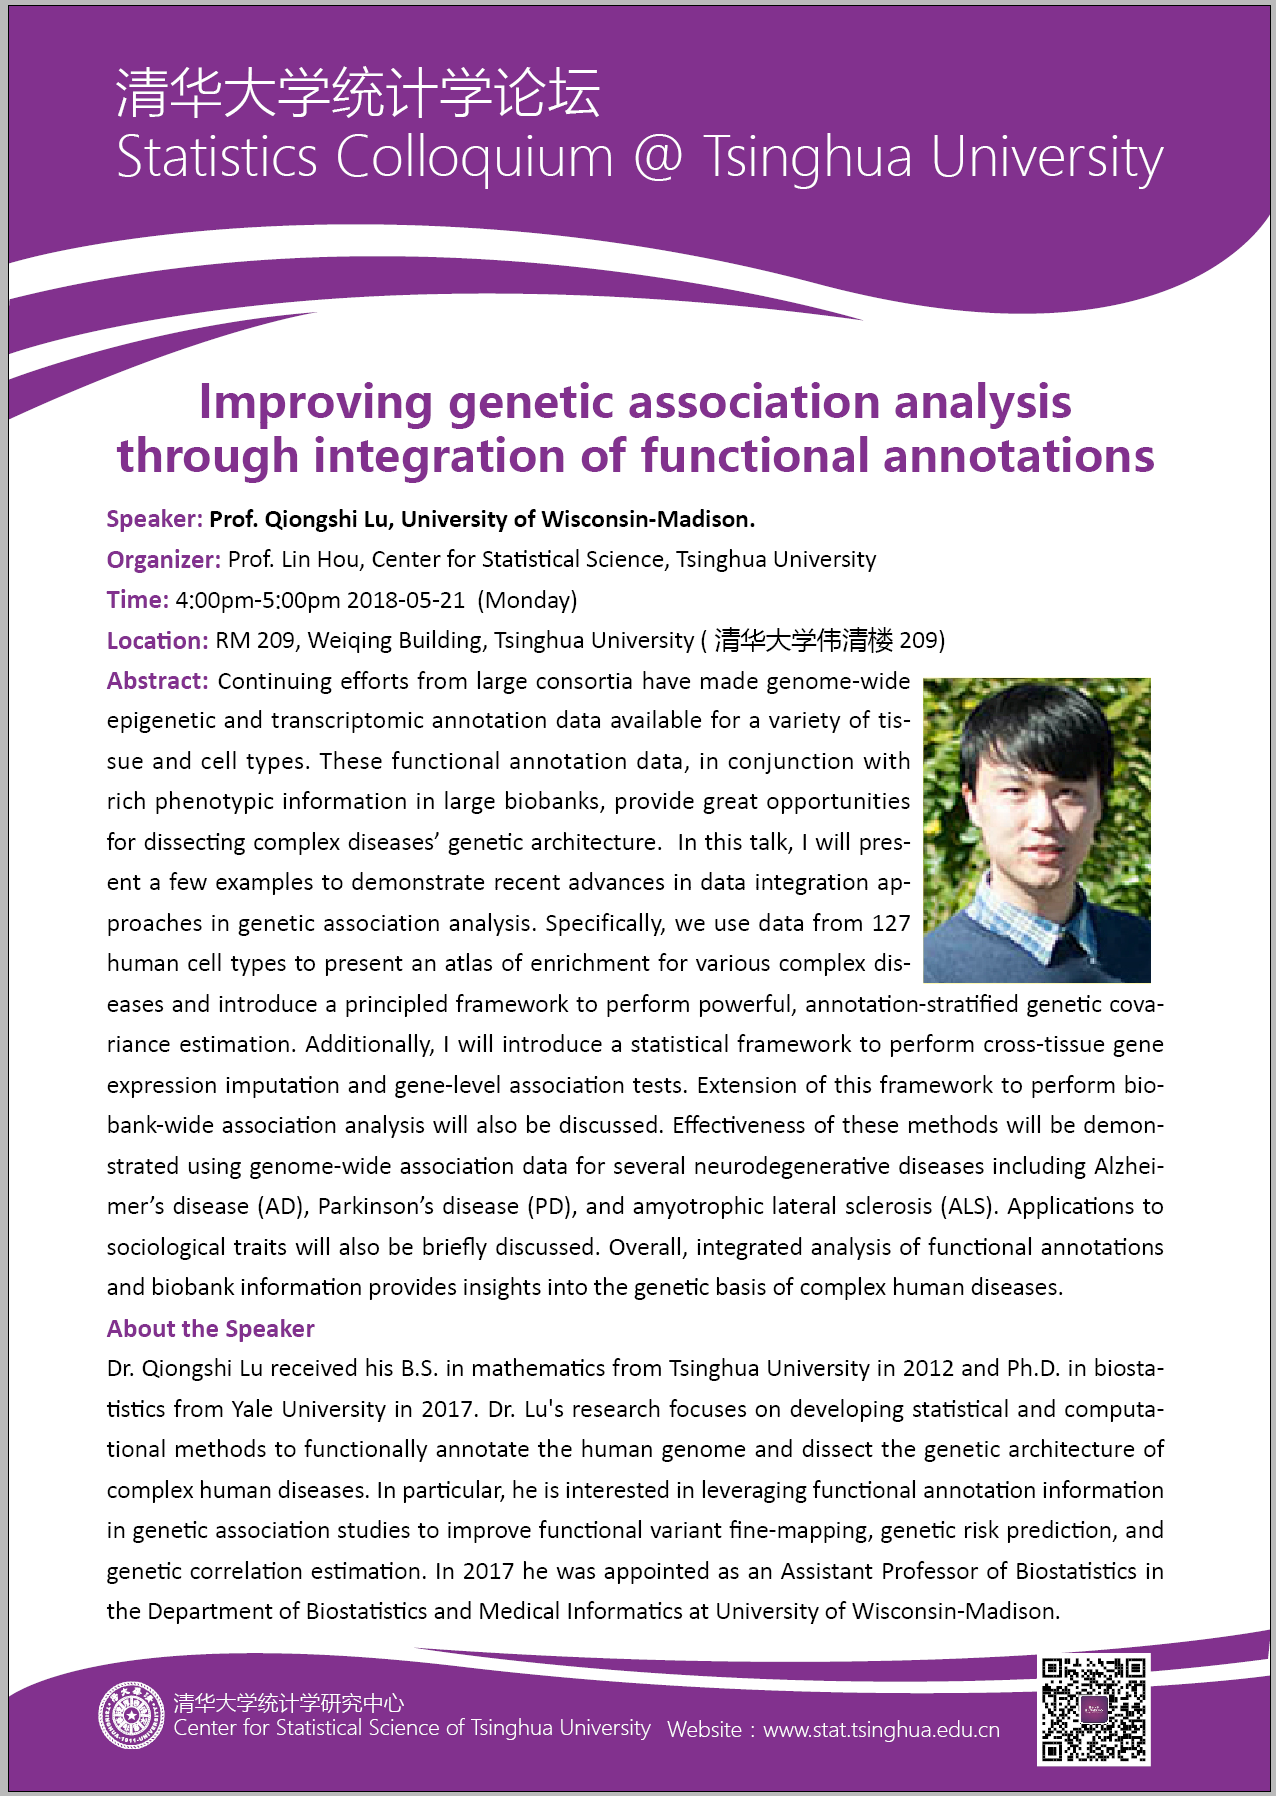 Improving genetic association analysis through integration of functional annotations